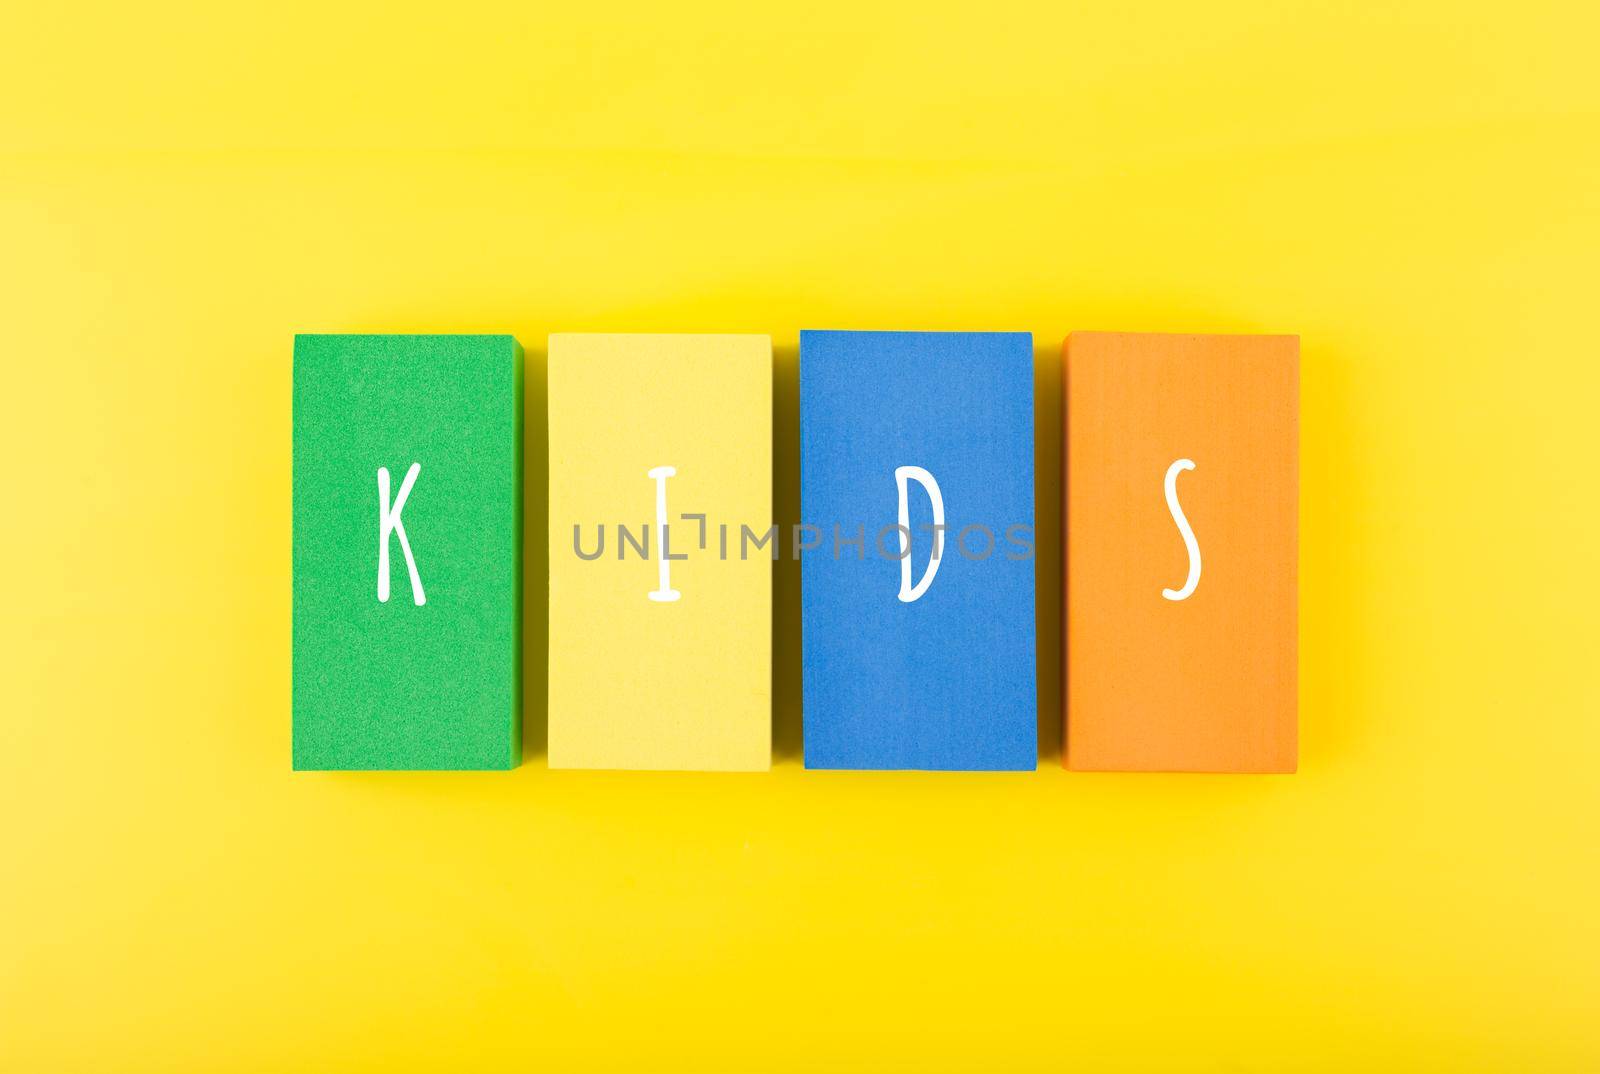 Word kids on colorful rectangles against bright yellow background. Concept of pre school, kindergarten, child care center